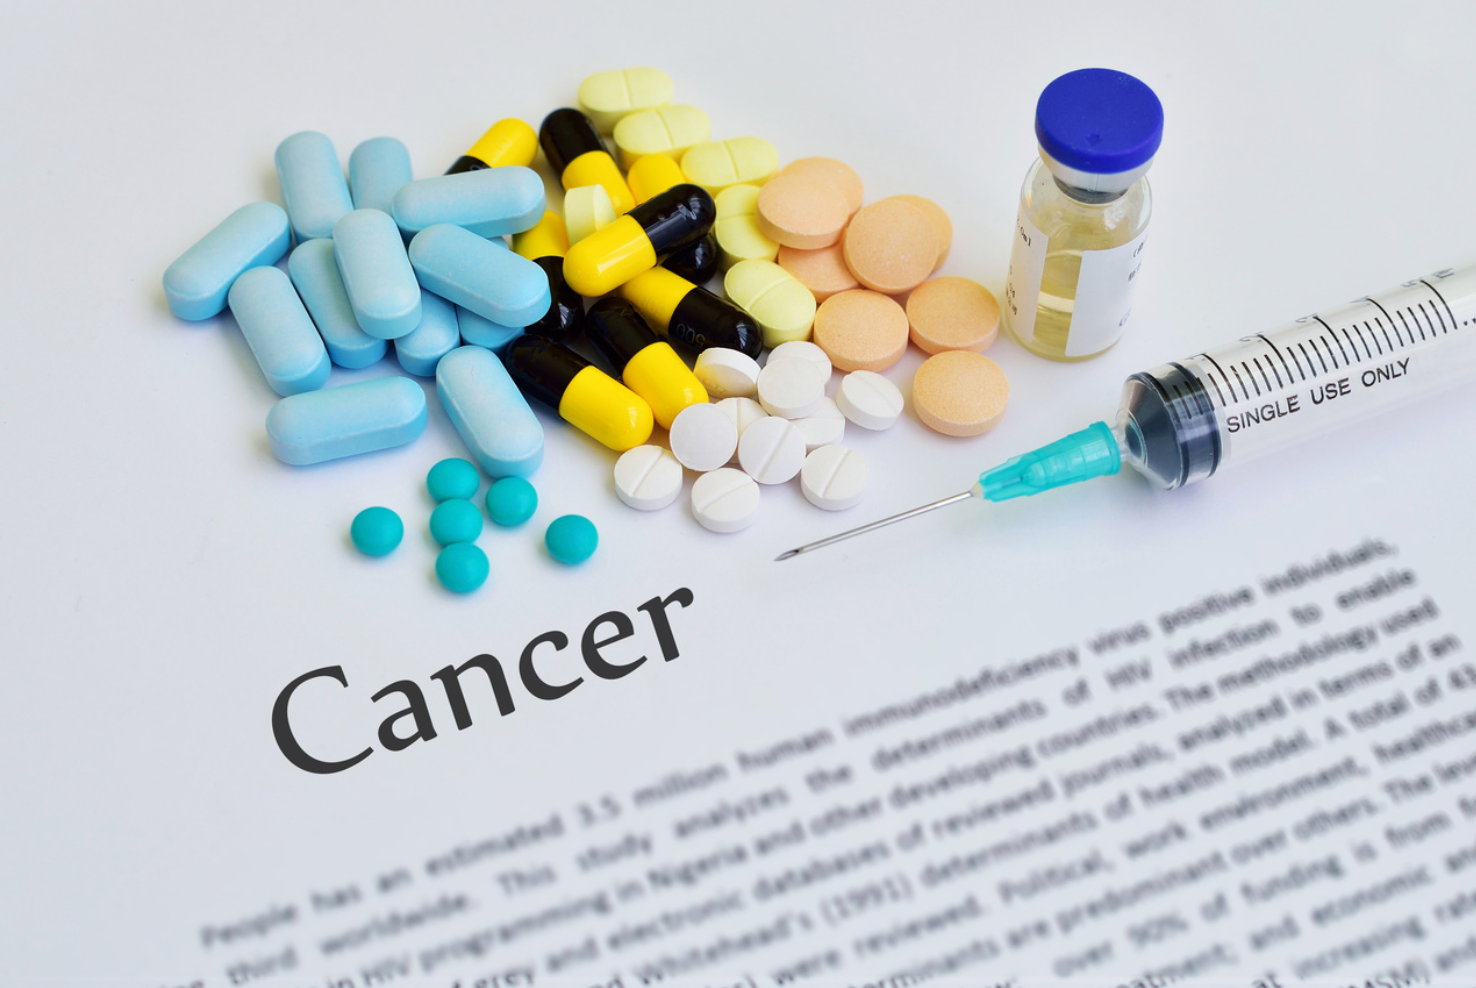 FDA to Evaluate BLAs for Enfortumab Vedotin in Locally Advanced or Metastatic Urothelial Cancer